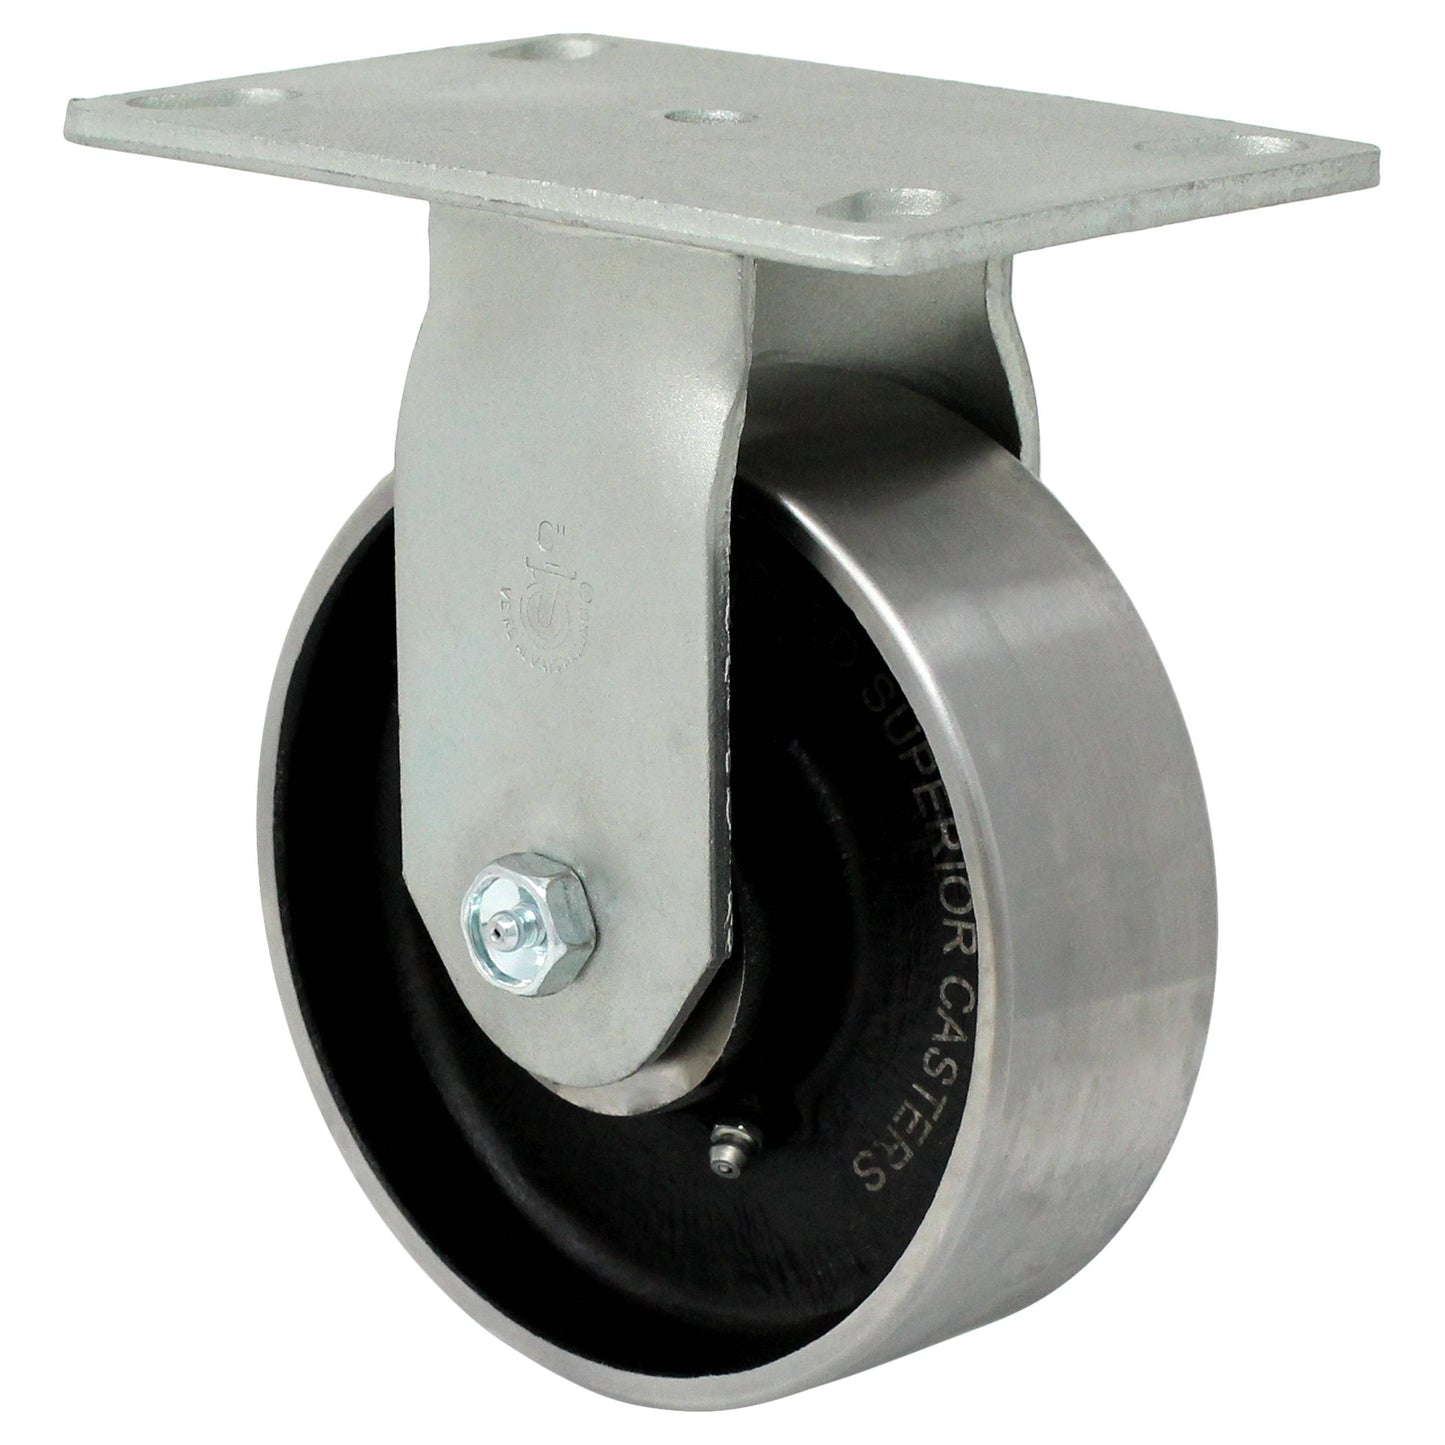 6" x 2" Forged Steel Wheel Rigid Caster - 1500 lbs. capacity - Durable Superior Casters